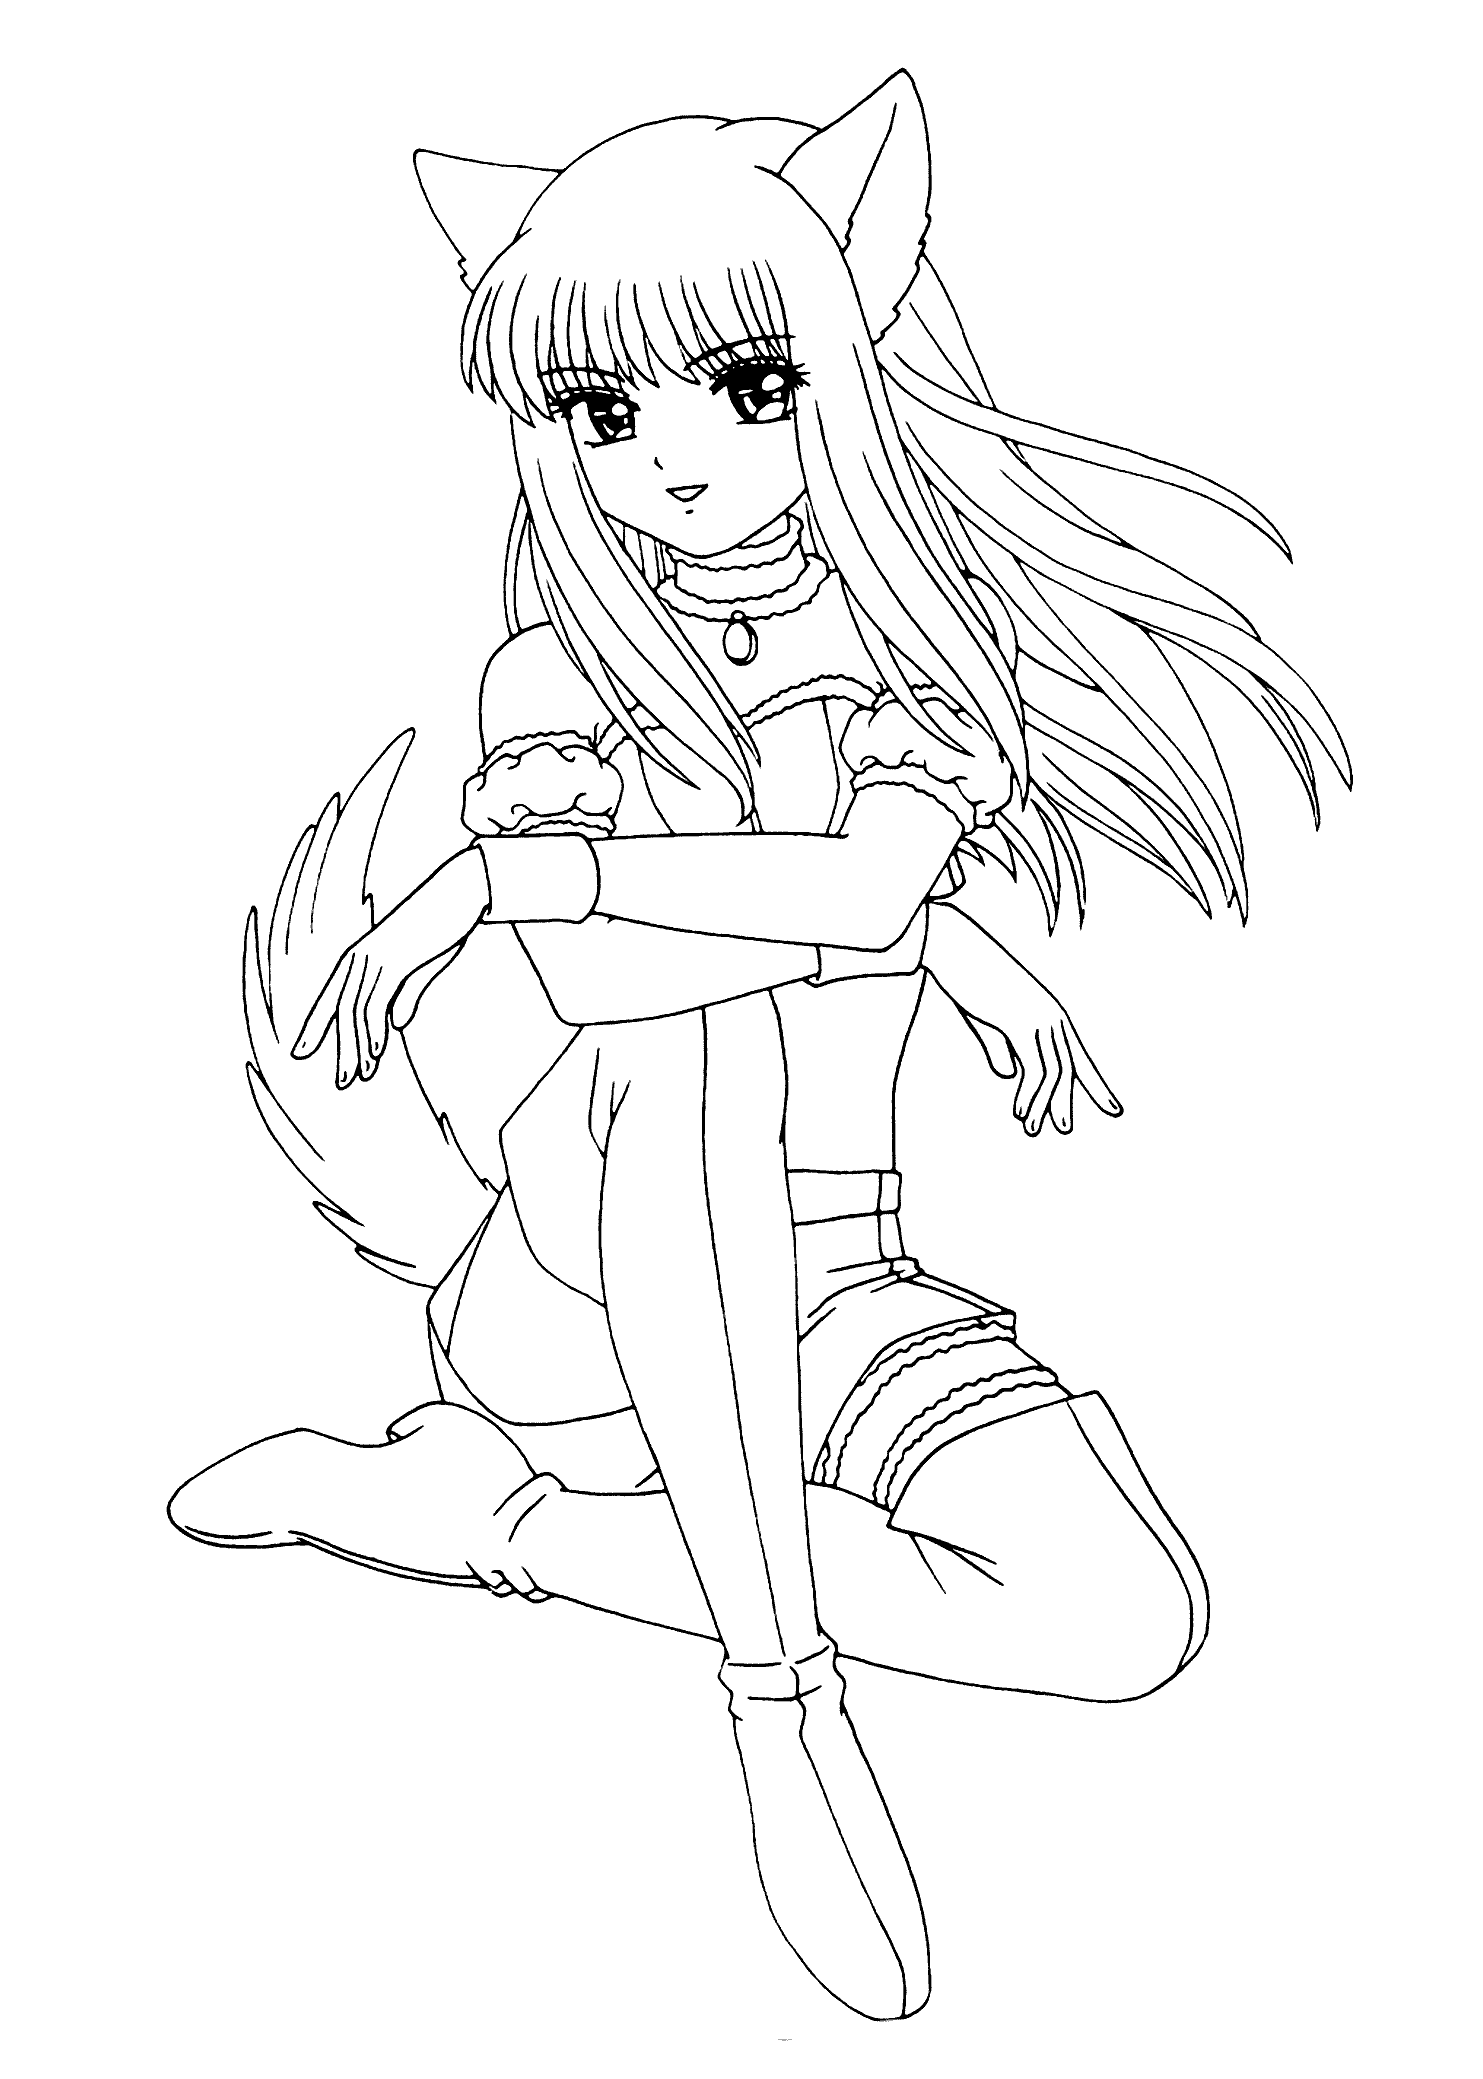 manga girl coloring pages manga coloring pages to download and print for free coloring manga pages girl 